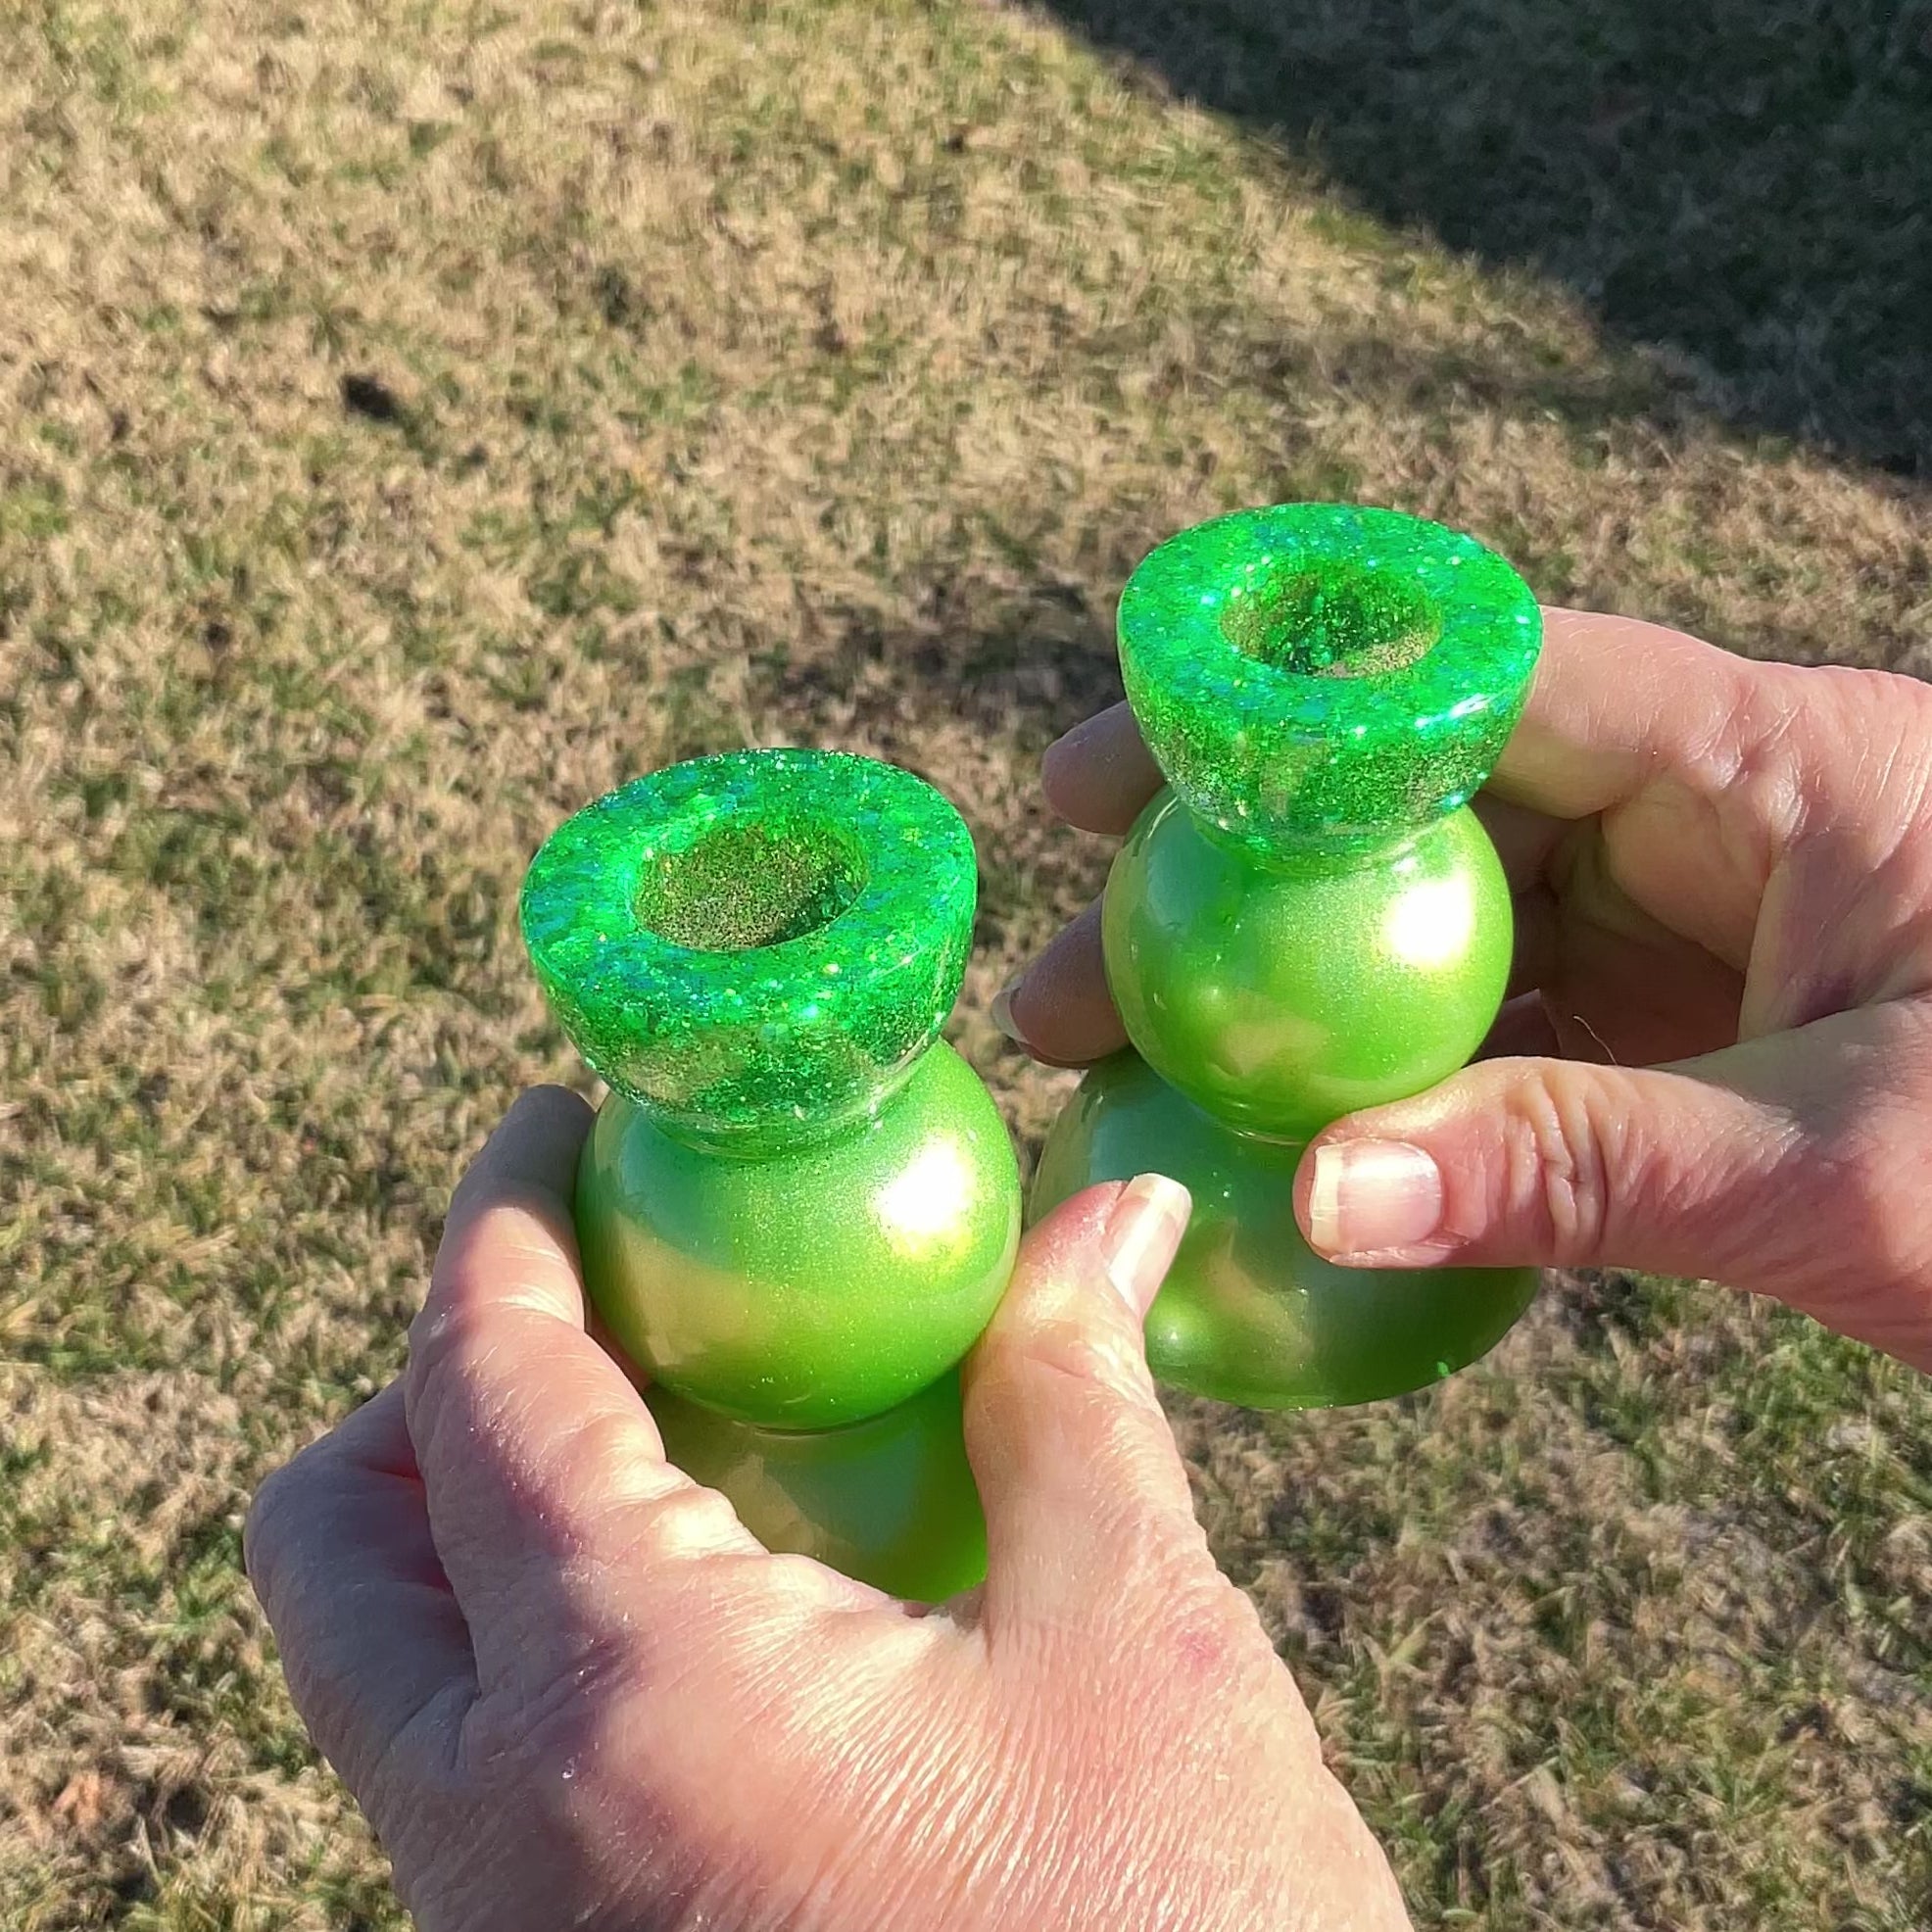 Two Handmade Pearly Lime Green Resin Rounded Geometric Candlestick Holders with Chunky Iridescent Glitter video showing how the glitter sparkles in the light.